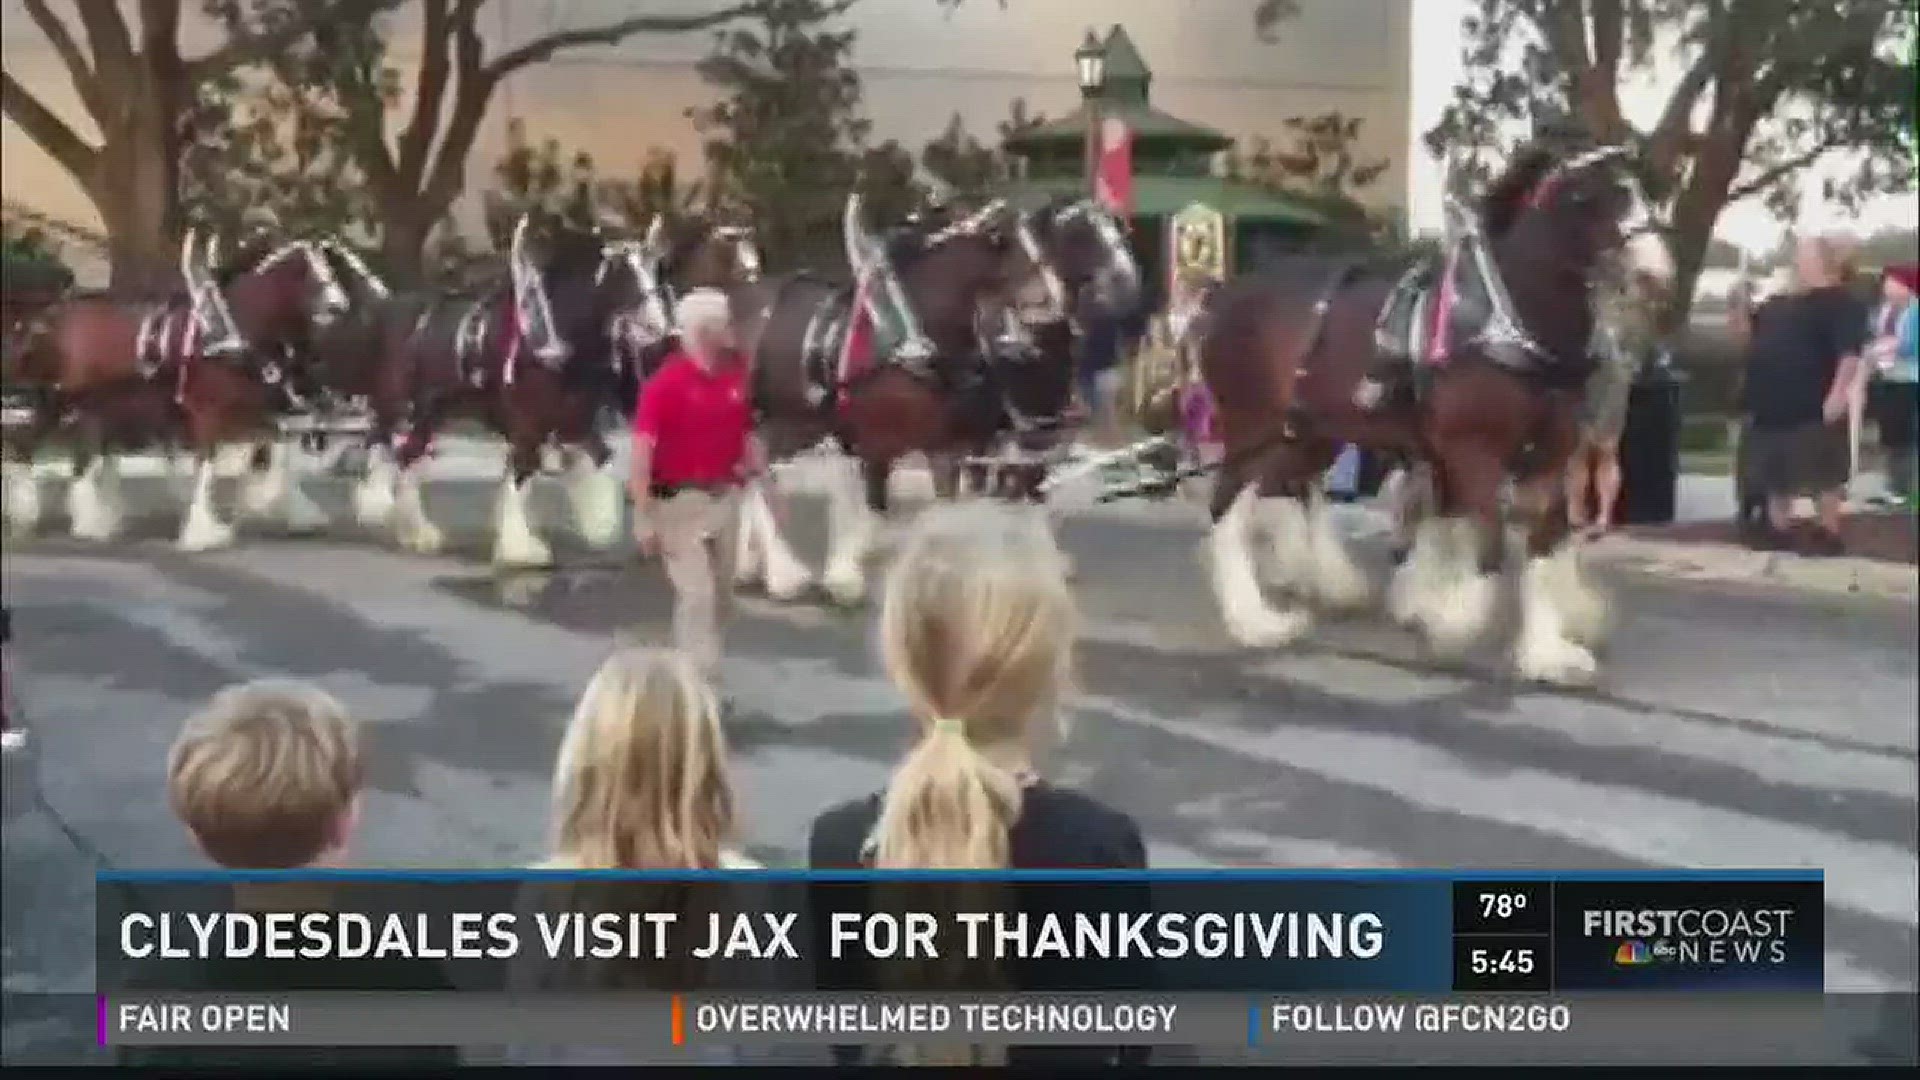 Budweiser Clydesdale horses visiting Jax for Thanksgiving